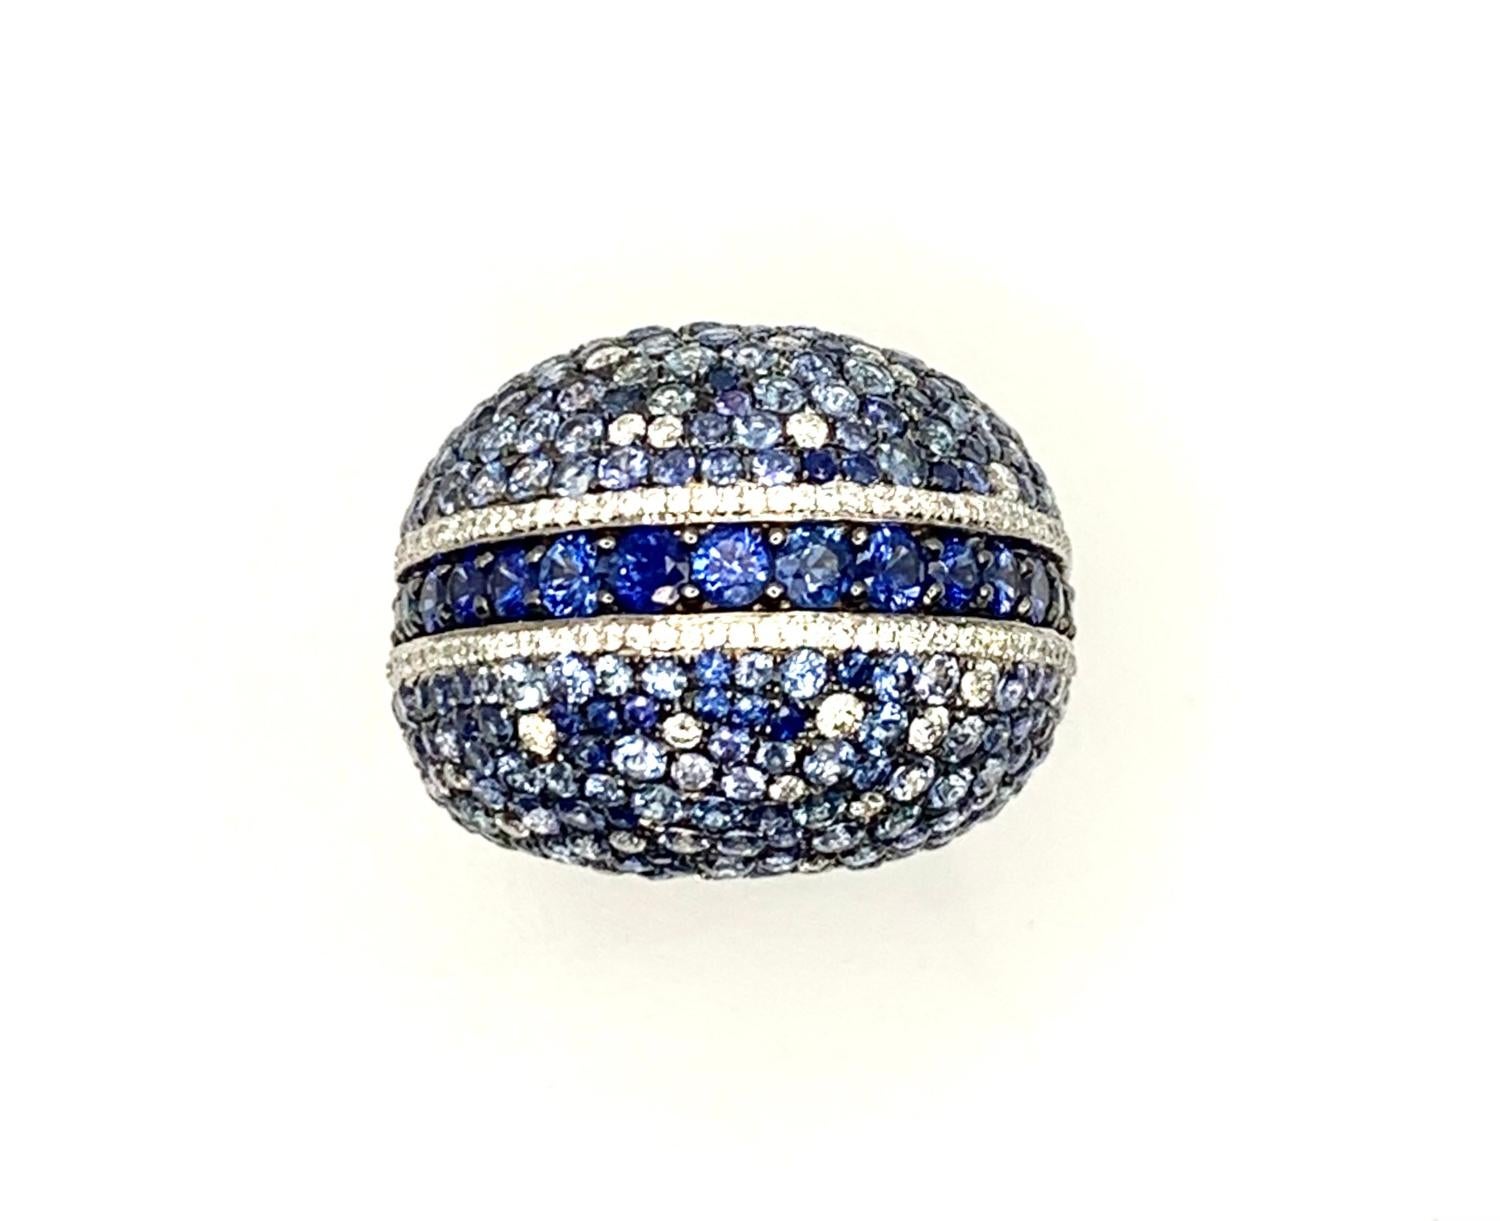 This large and impressive dome ring features sparkling shades of blue sapphires that have been pave set in 18k white gold with brilliant cut diamonds! A bold line of rich, blue sapphires forms the central row of this ring, highlighted on both sides